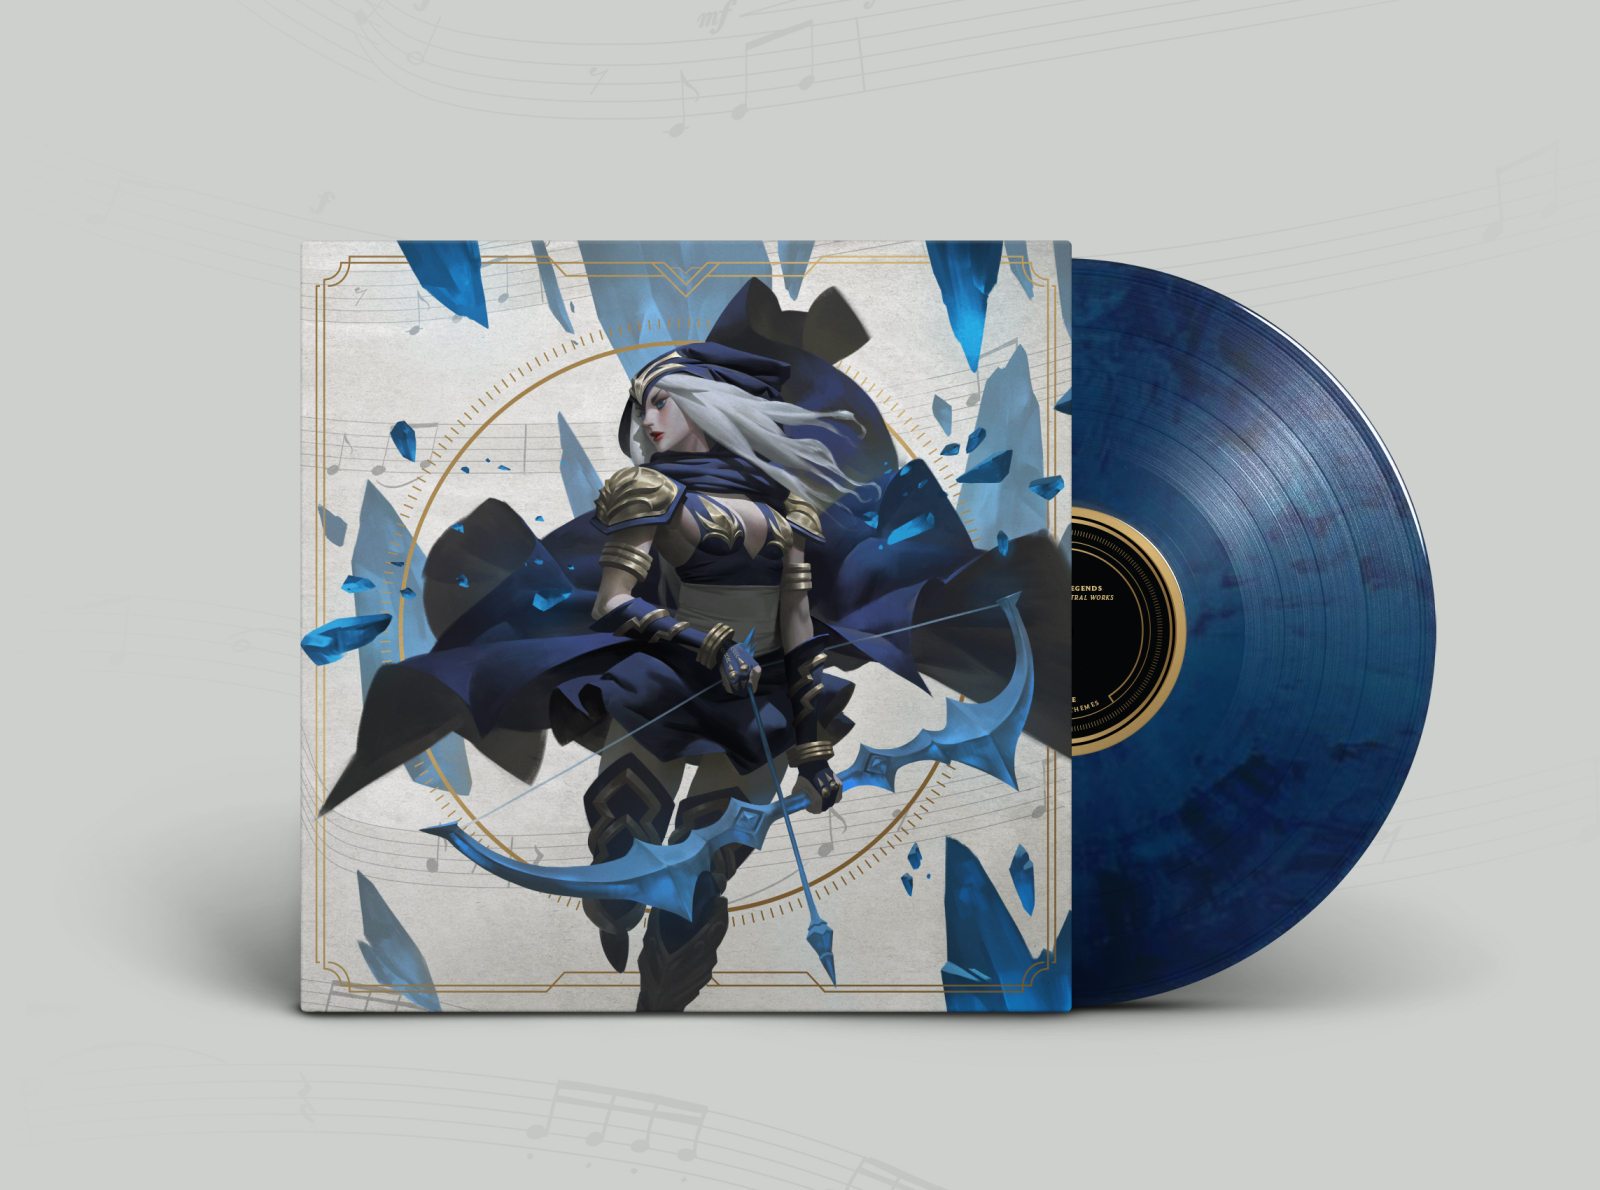 League of - 10 Year Vinyl by Moe Radke for Riot Games on Dribbble